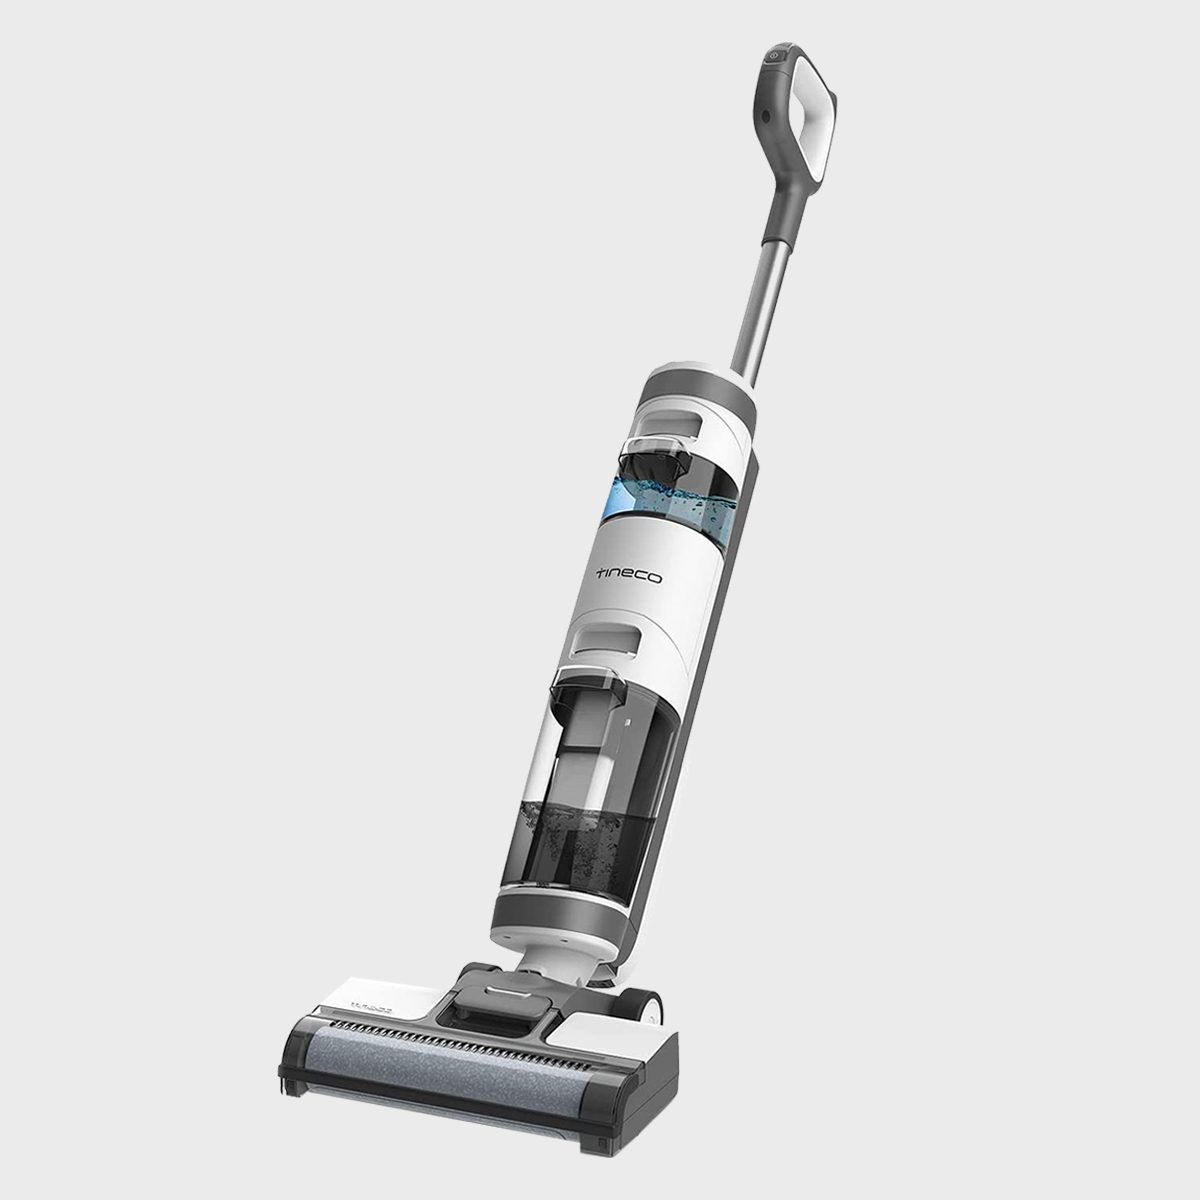 STILL MY #1 CLEANING HACK!!! Using a vacuum mop to clean your floors! , tineco ifloor 3